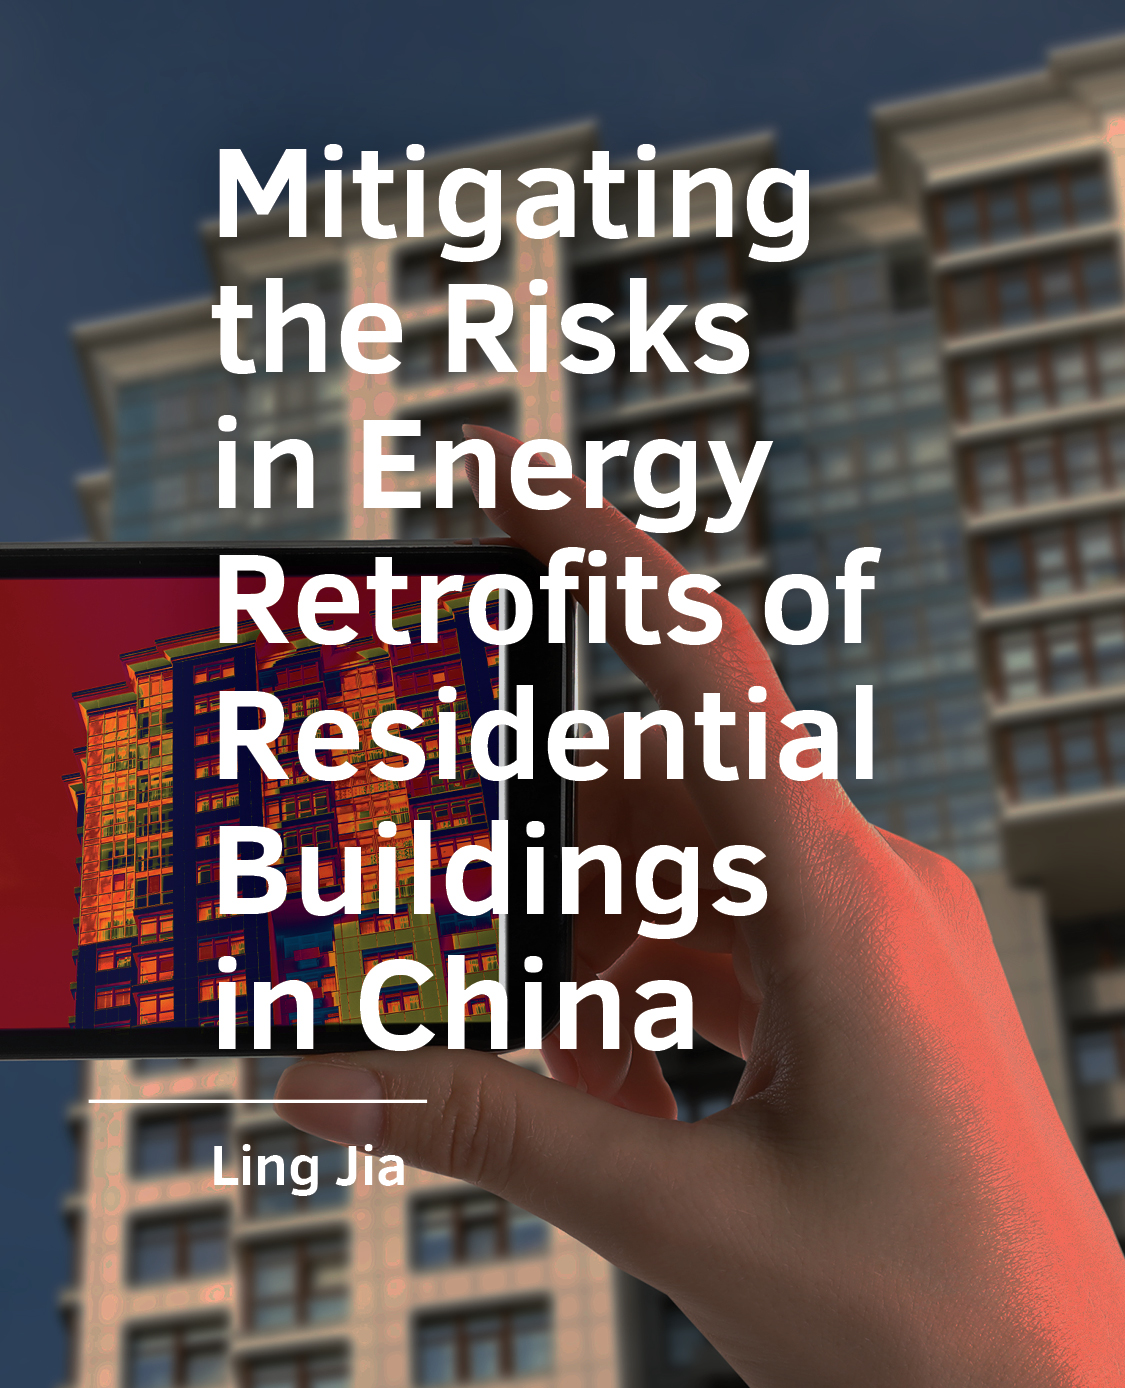 					View No. 24 (2021): Mitigating the Risks in Energy Retrofits of Residential Buildings in China
				